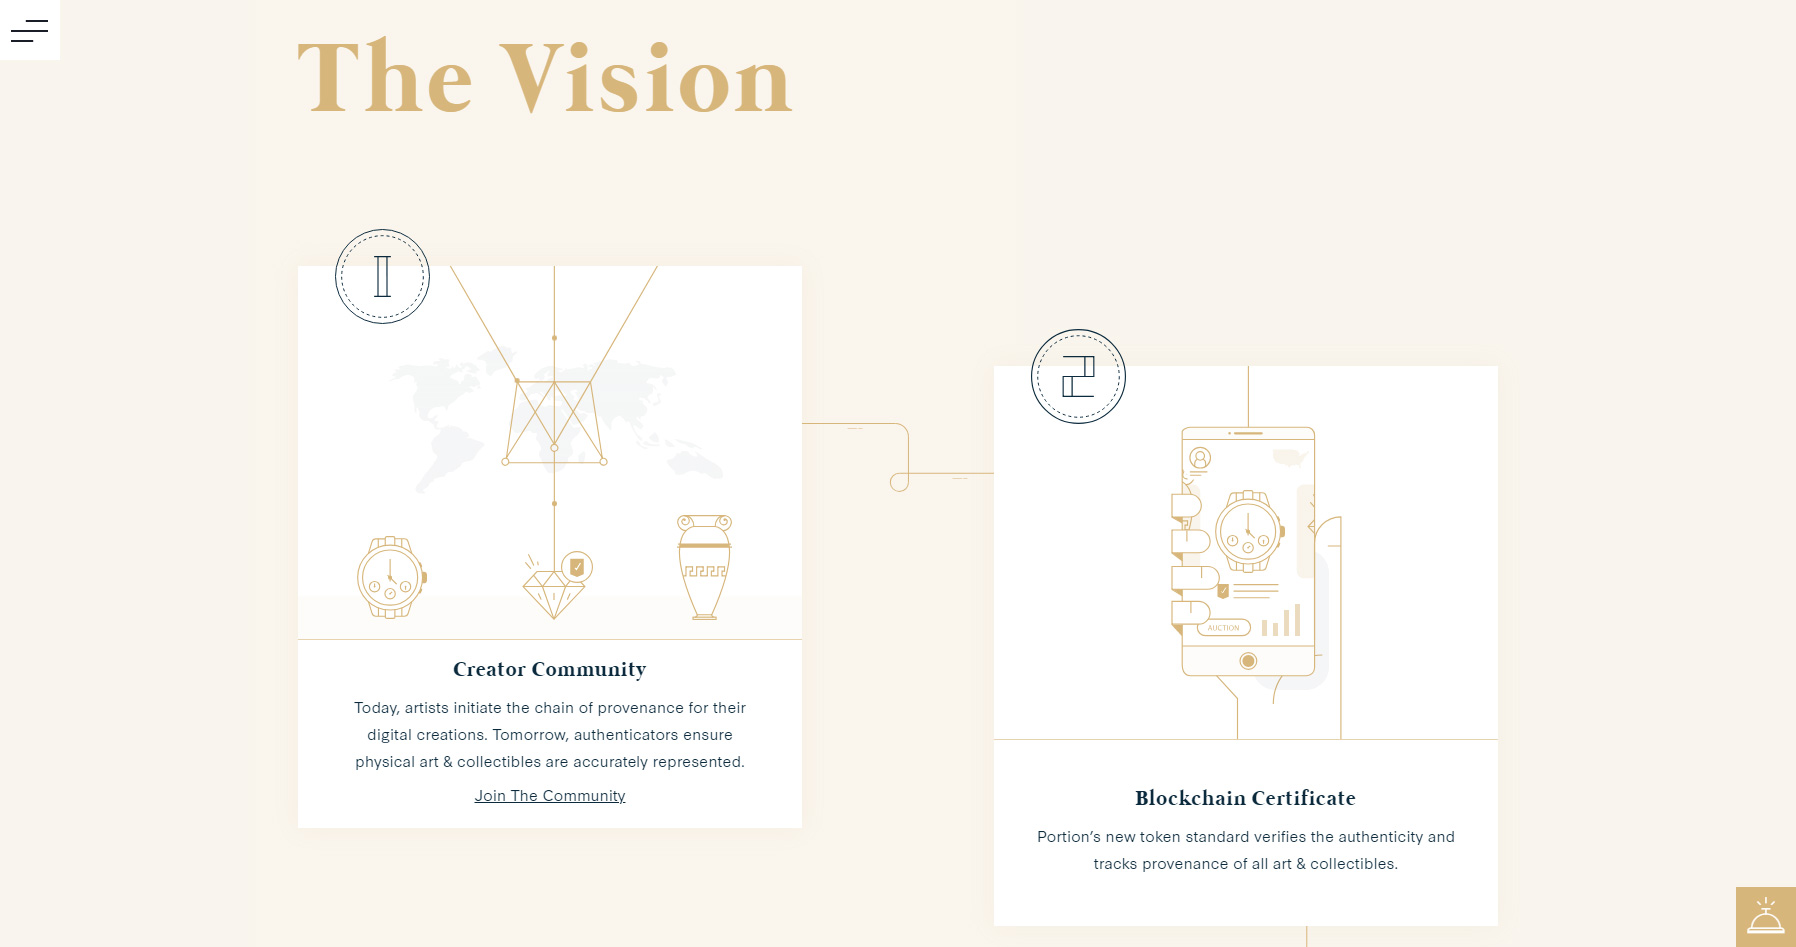 Portion - Website of the Day